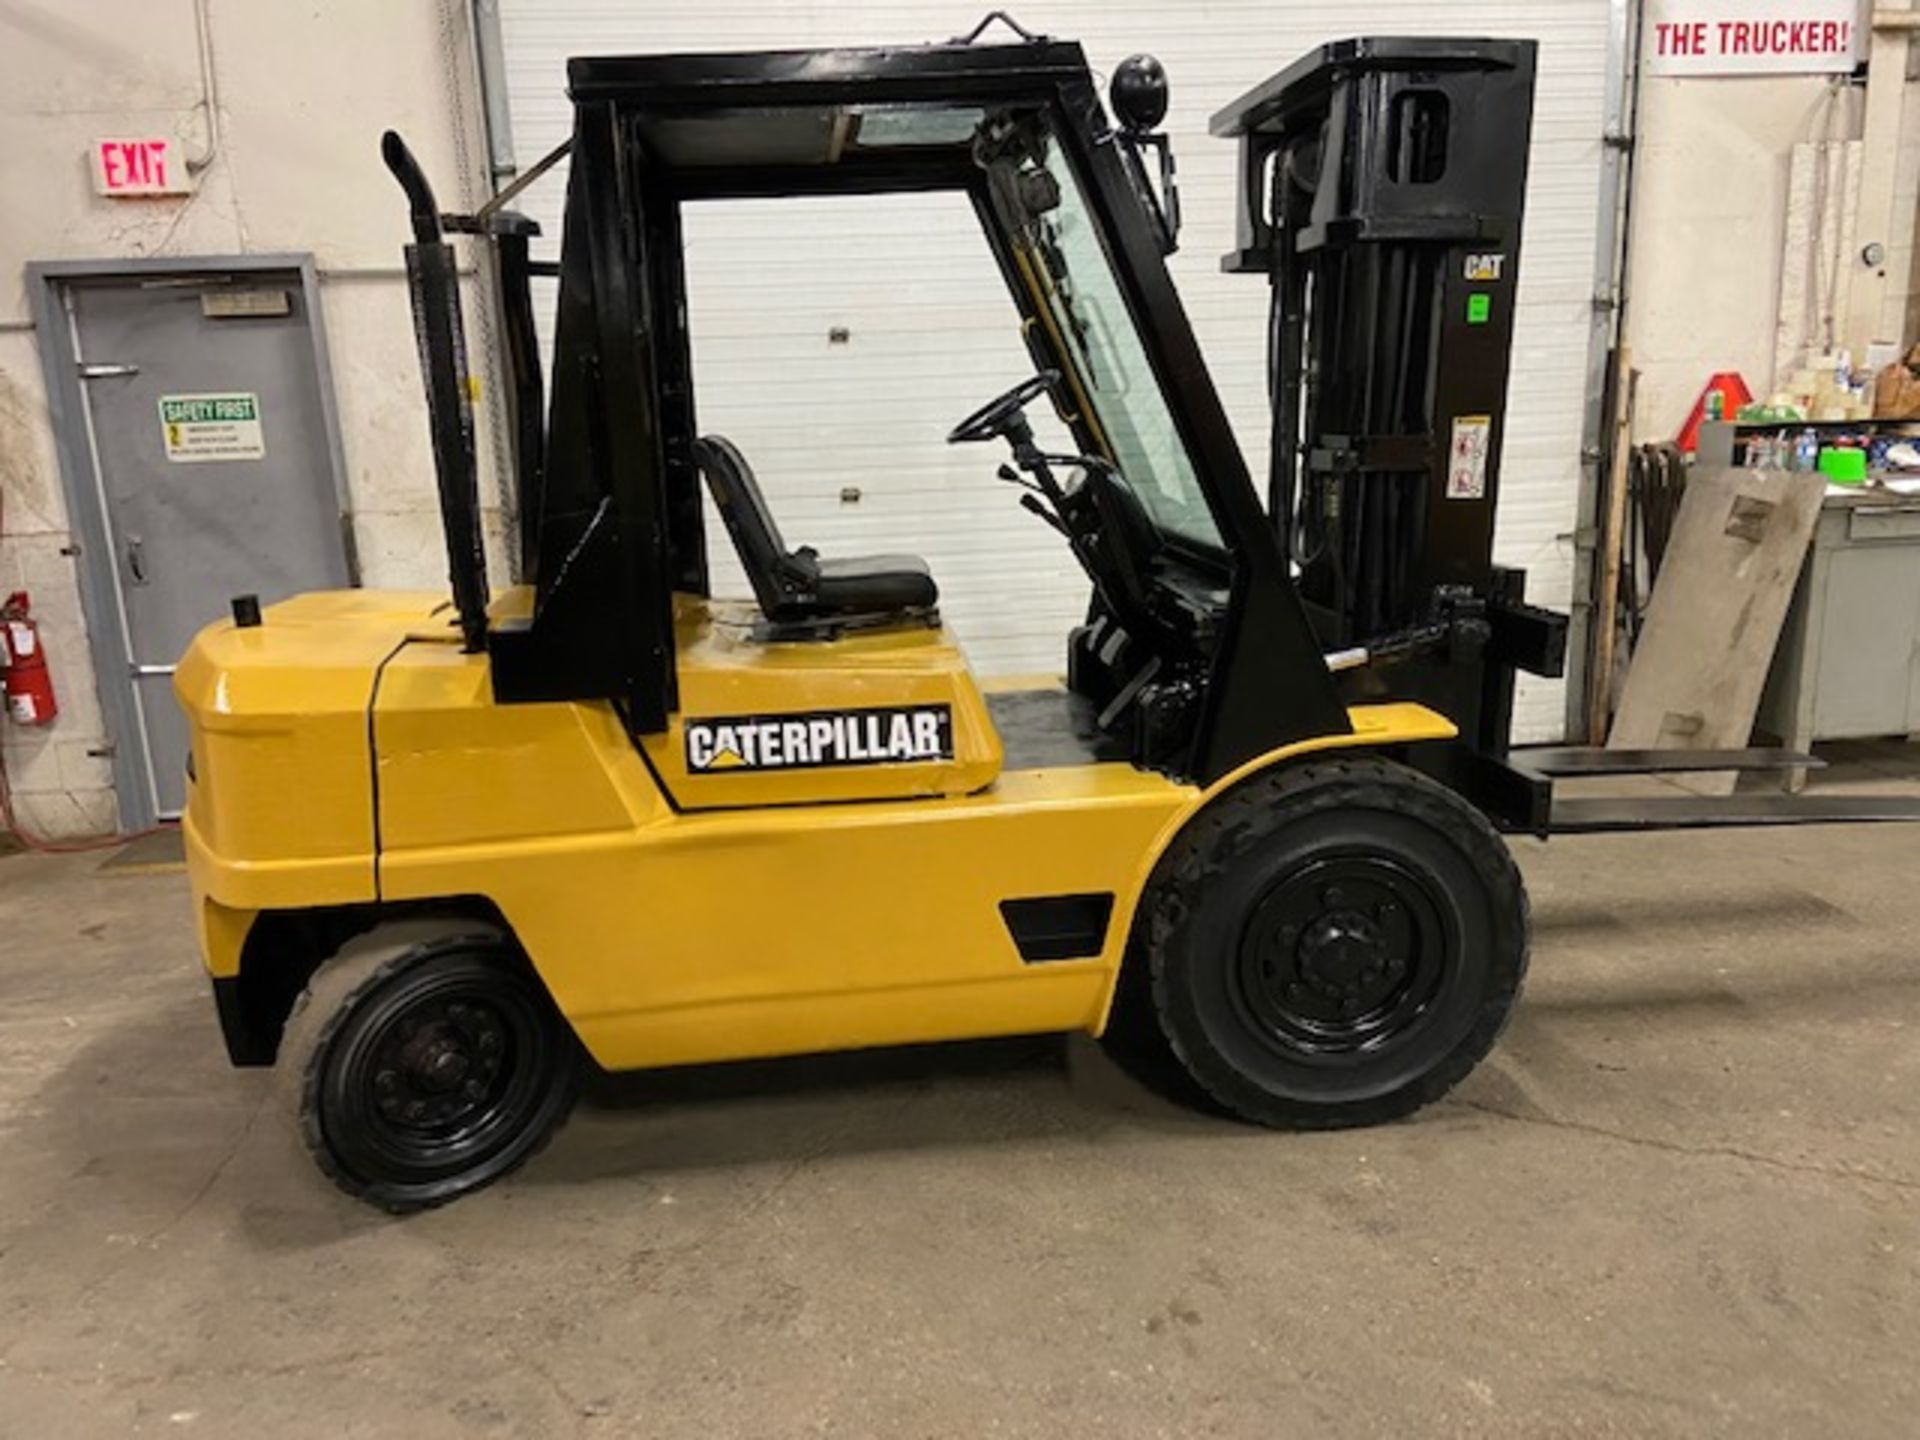 FREE CUSTOMS - Caterpillar 8,000lbs Capacity Diesel OUTDOOR Forklift with 3 stage mast